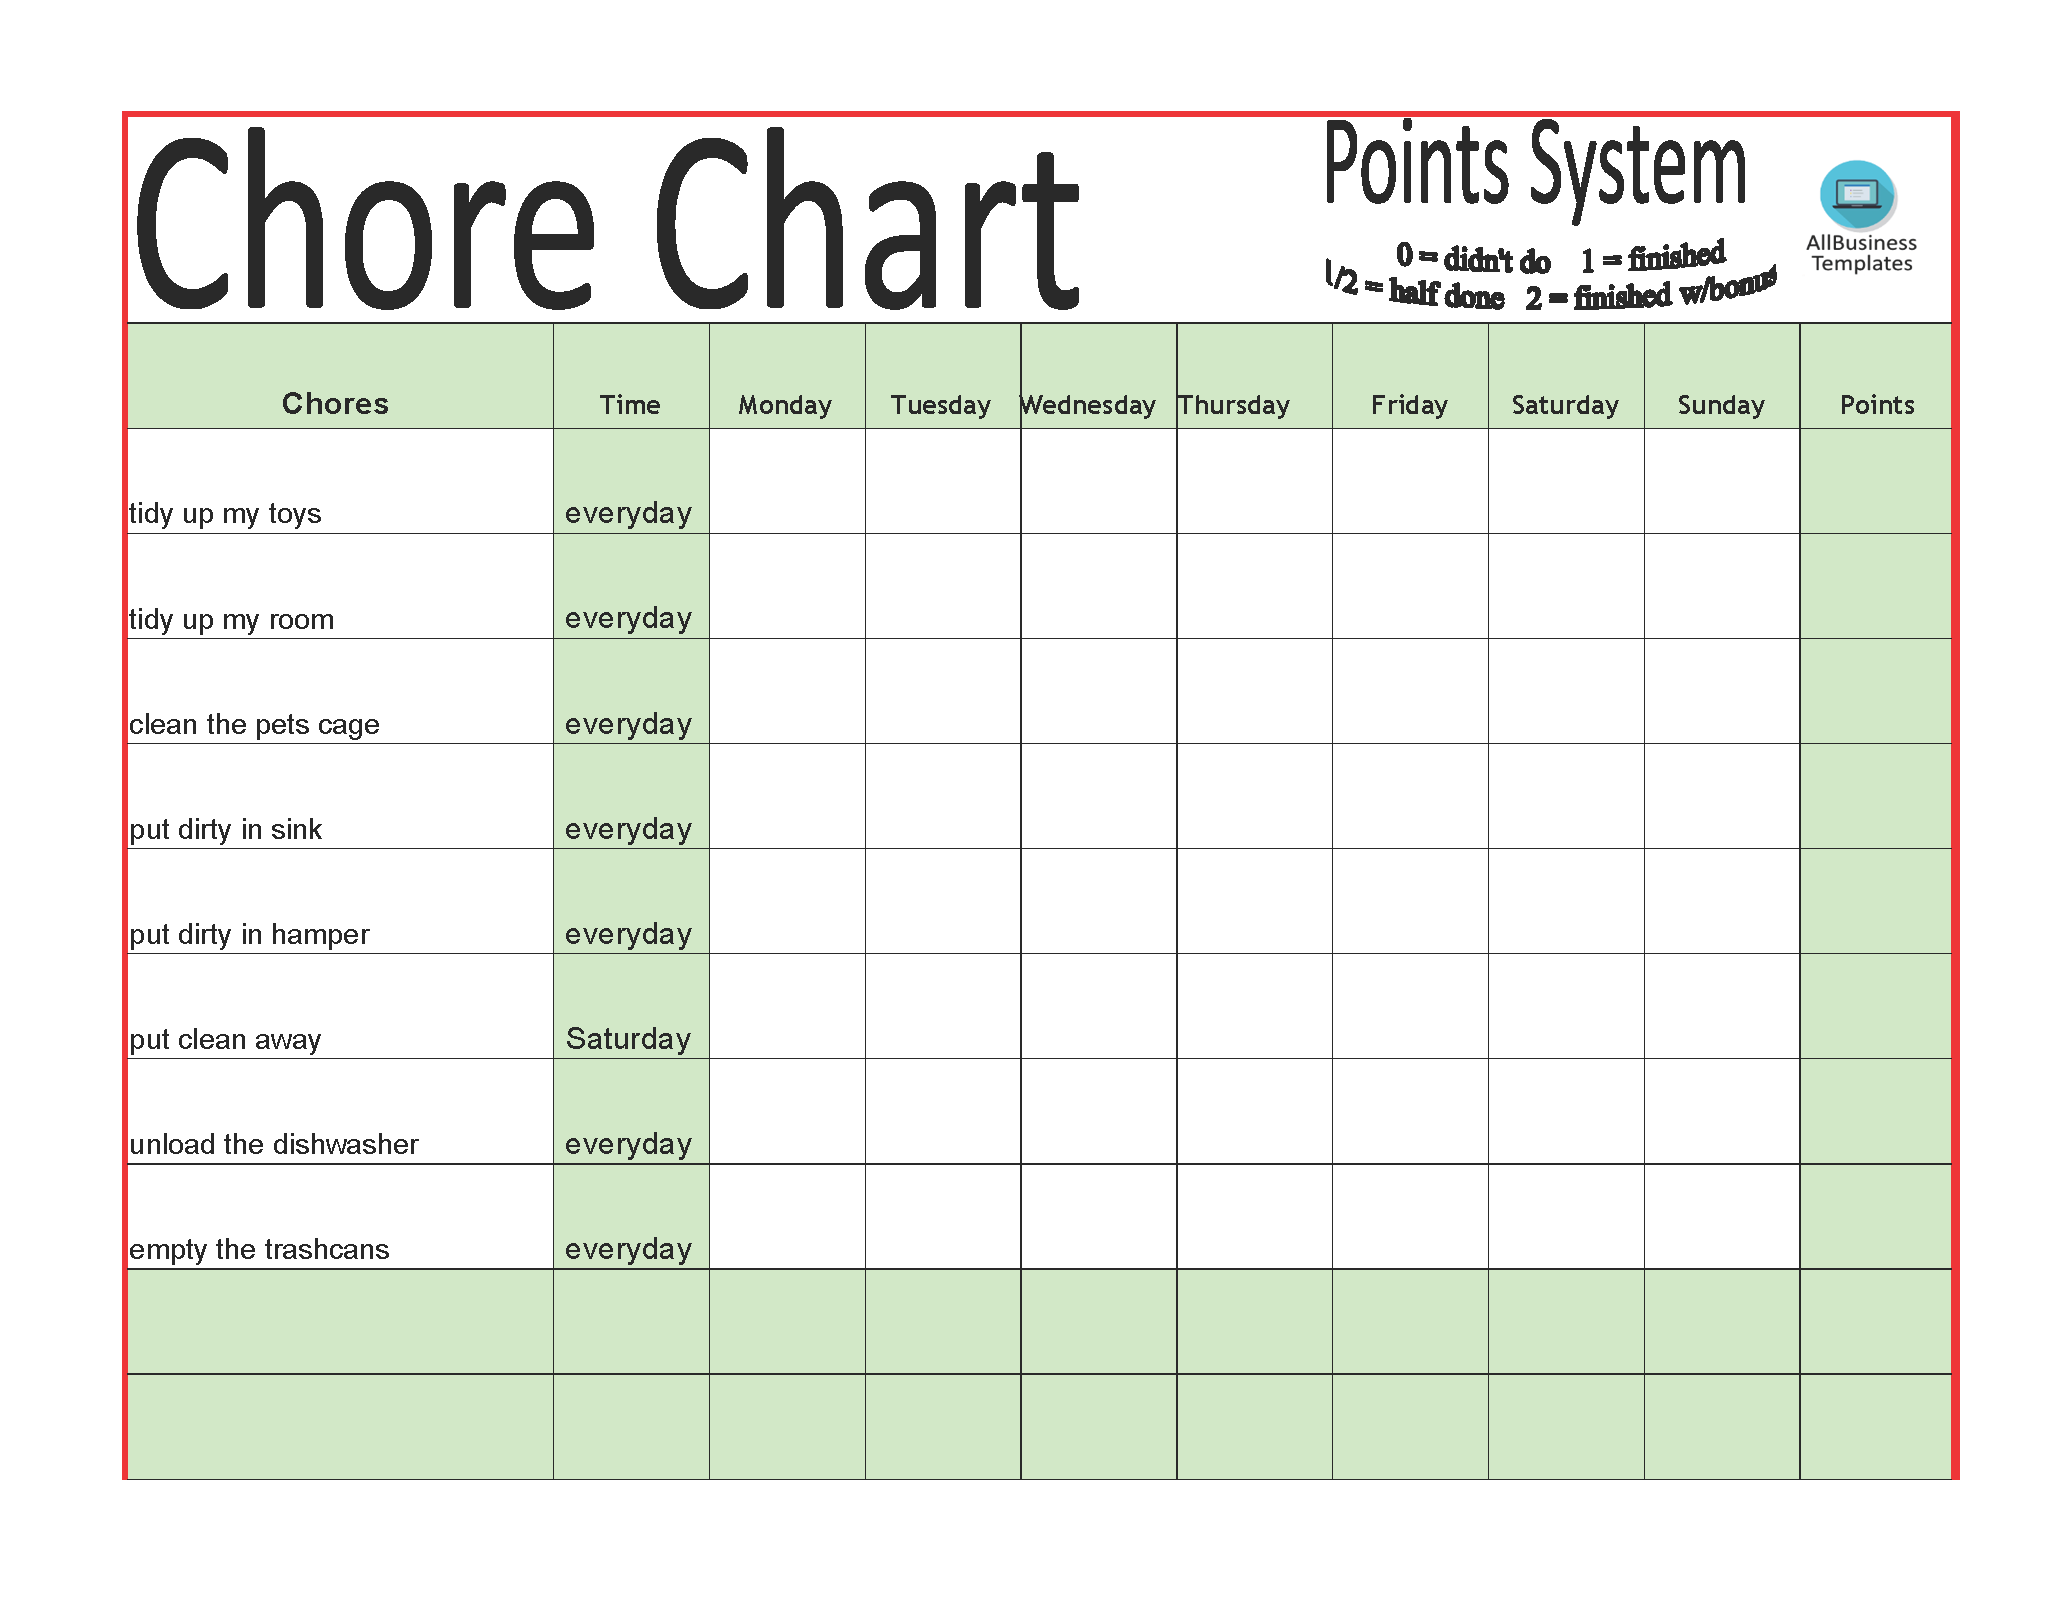 chore chart template in excel modèles